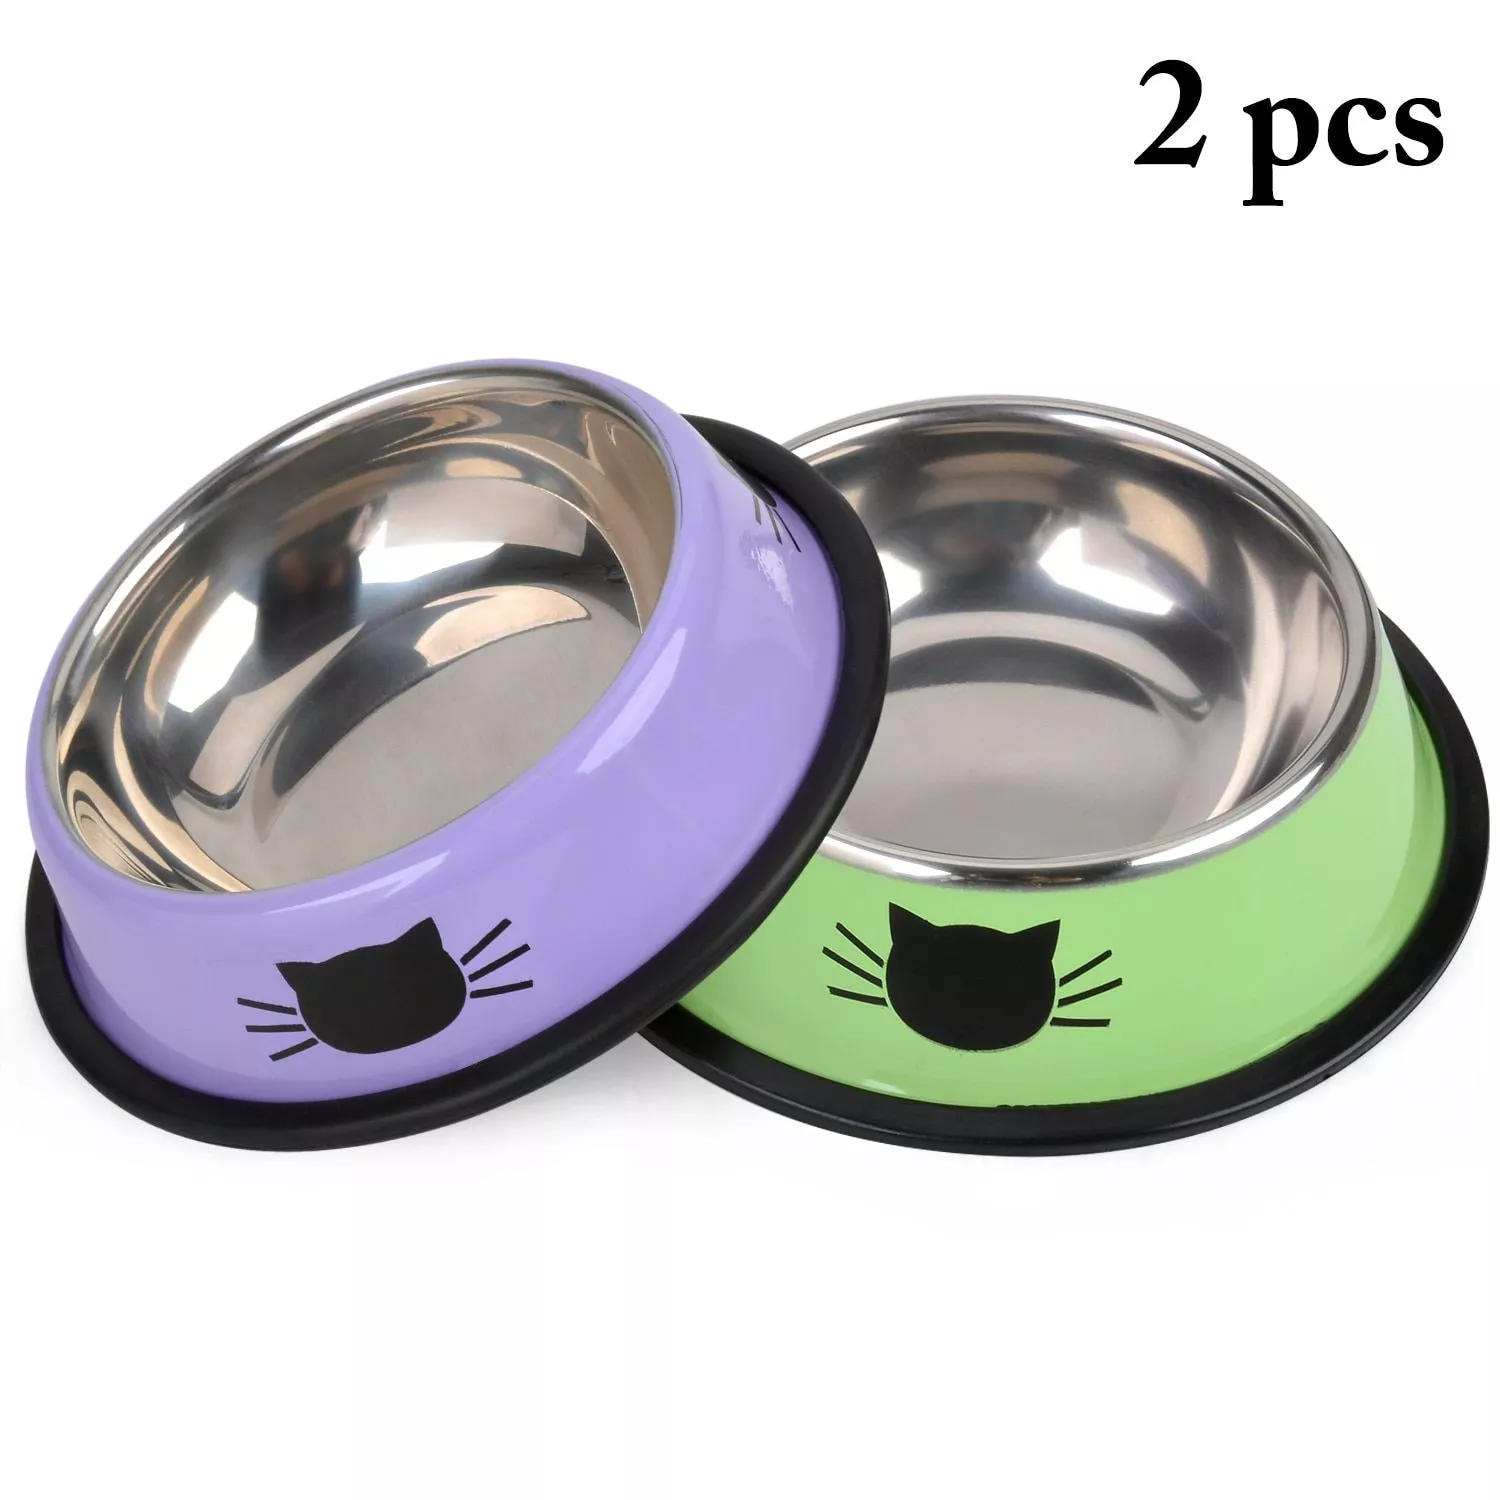 New-Pet-Product-For-Dog-Cat-Bowl-Stainless-Steel-Anti-Skid-Pet-Dog-Cat-Food-Water-Bowl-Pet-Feeding-B-32967657250-1